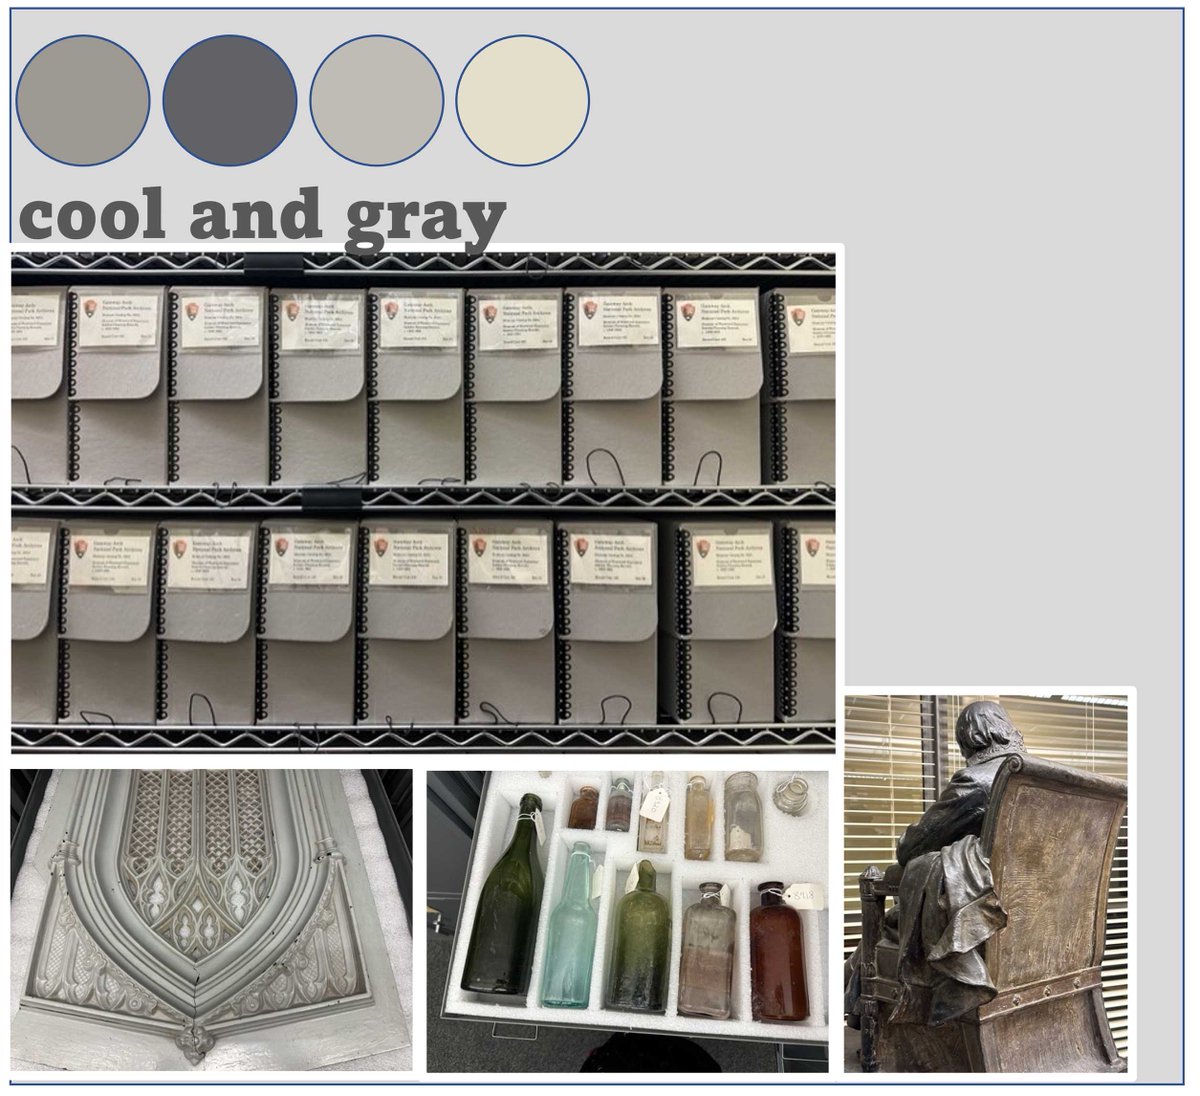 NPS Fashion Week: Cloaked in the stories of our nation. Gray may be the Gateway Arch's signature color, but the cool and gray vibe is also in force at the park's museum collections center. #NPSFW #NationalParkServiceFashionWeek #FindYourPark